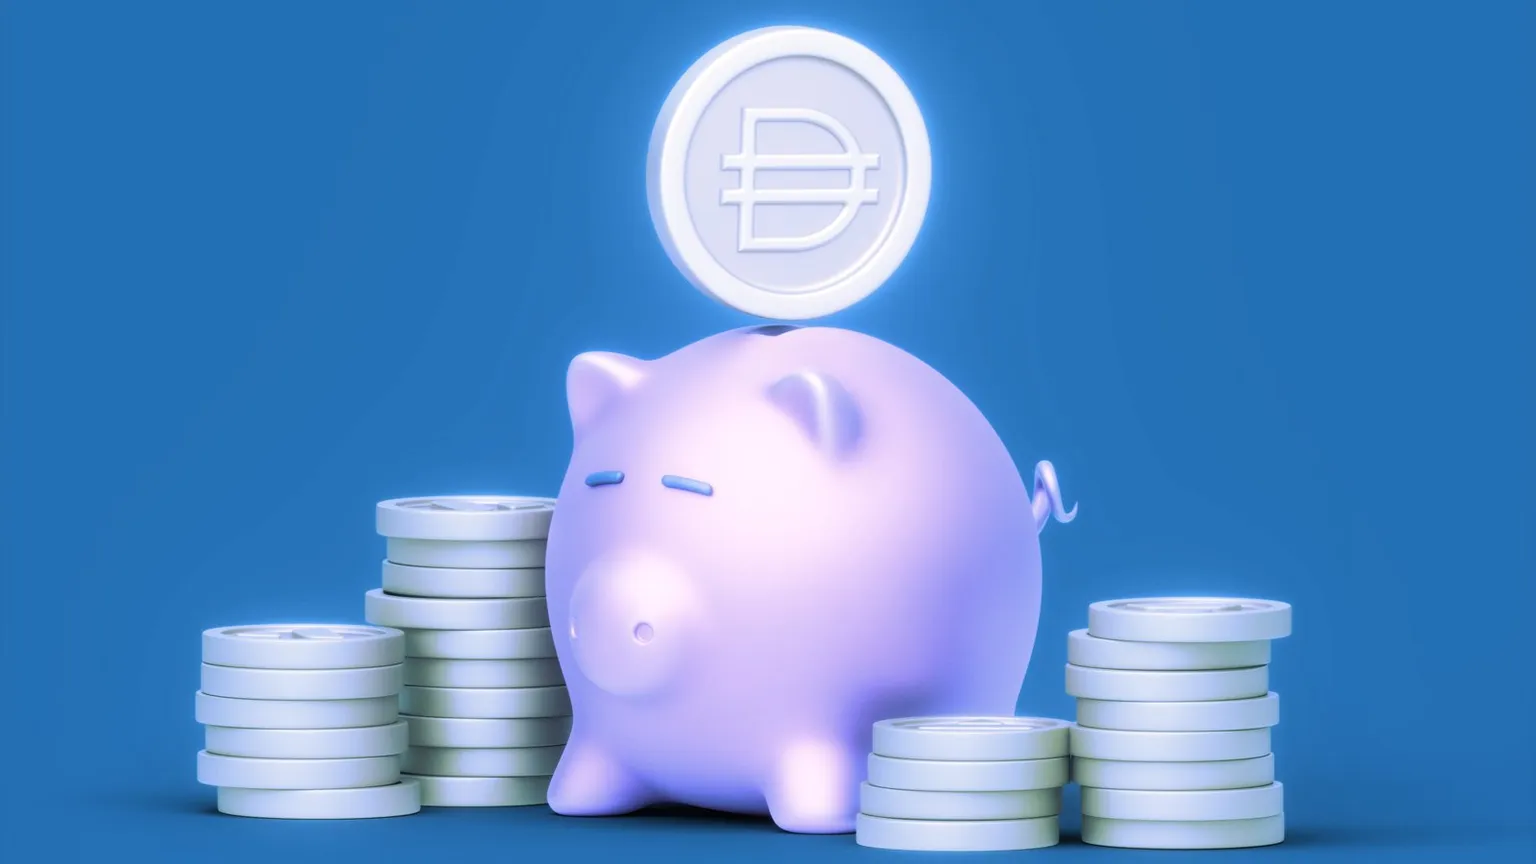 DAI is an algorithmic stablecoin pegged to the U.S. dollar. Image: Shutterstock